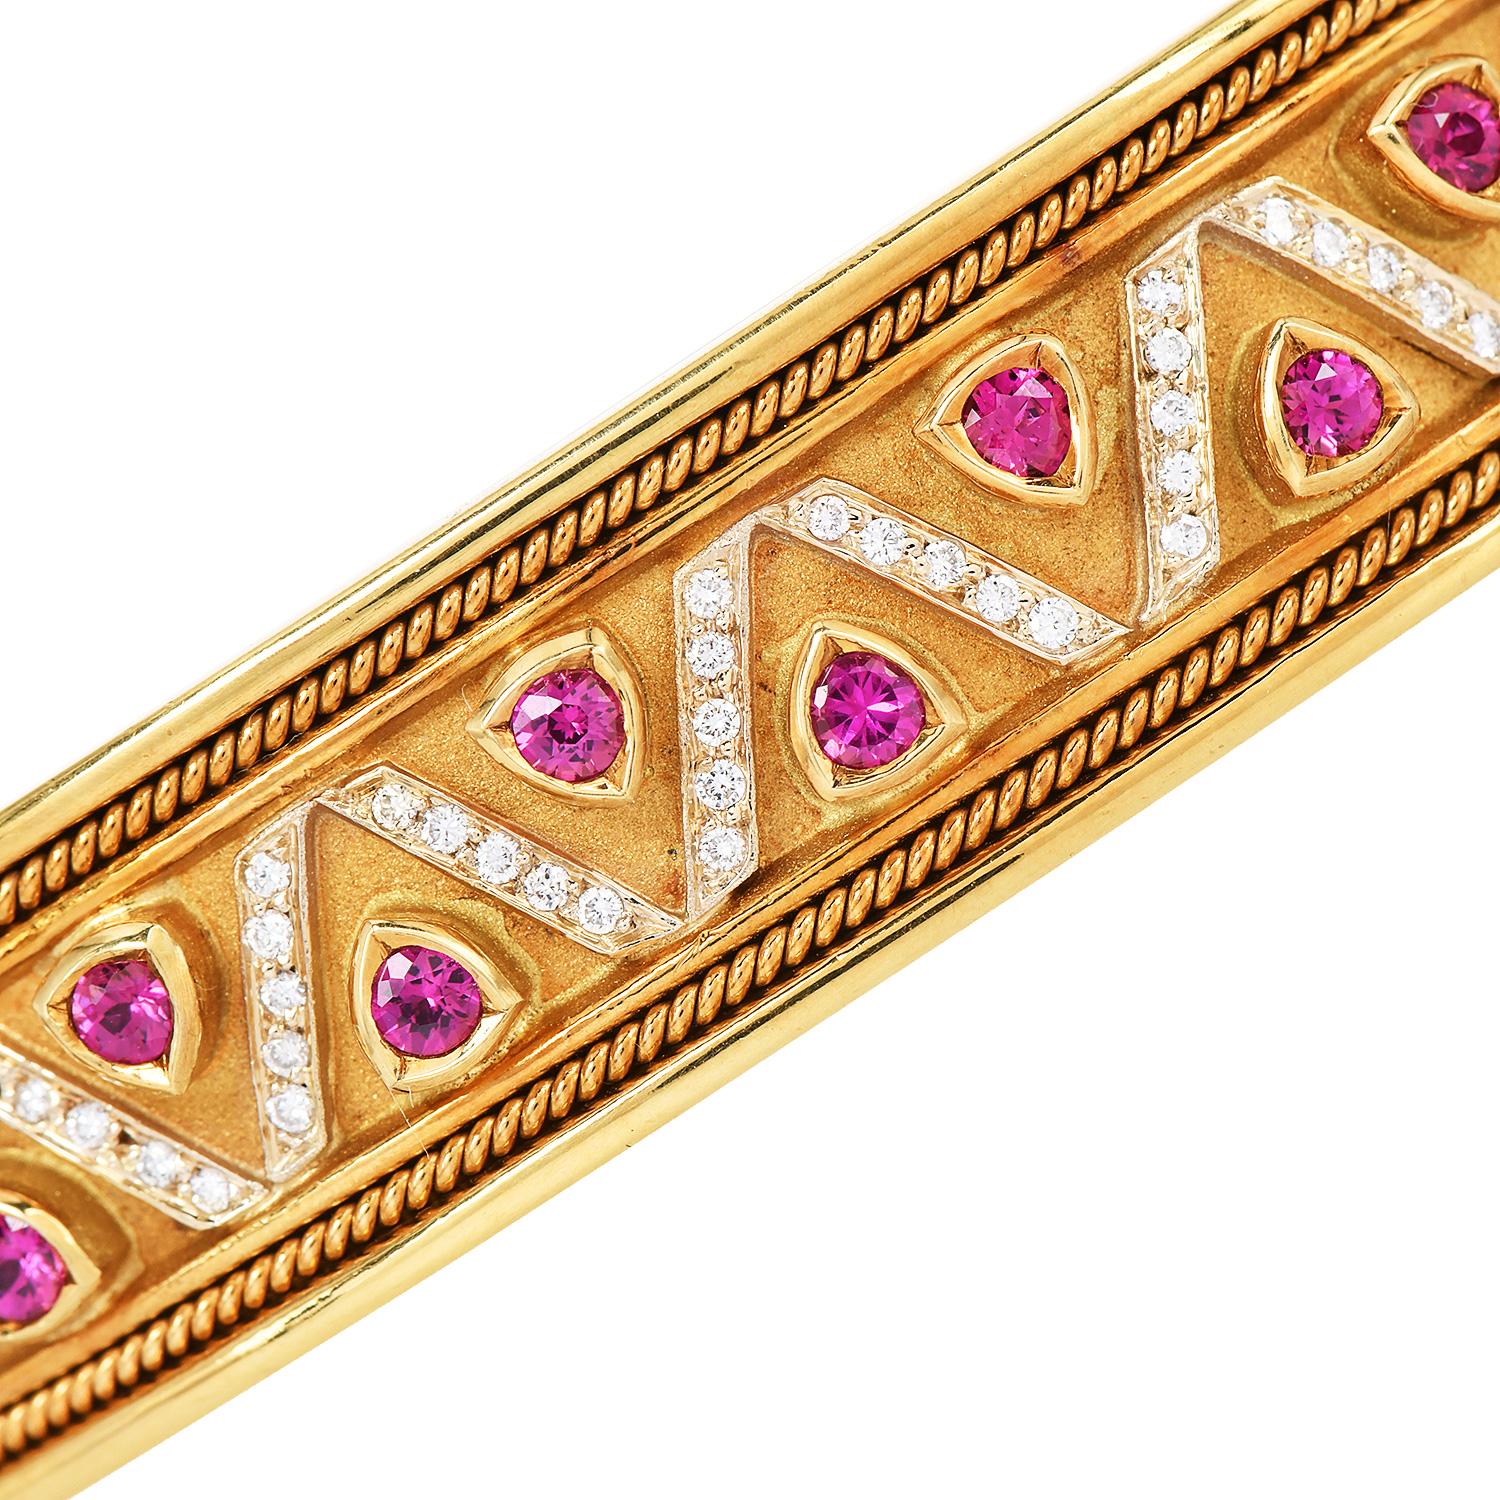 This 1980S wide cuff bracelet MAde in Solid 18K yellow gold with genuine Rubies and Diamonds.

The bracelet is decorated with precious stones Rubies, and diamonds set in a Triangle Design Pattern. 

The Cuff bracelet has a hinged insert secure